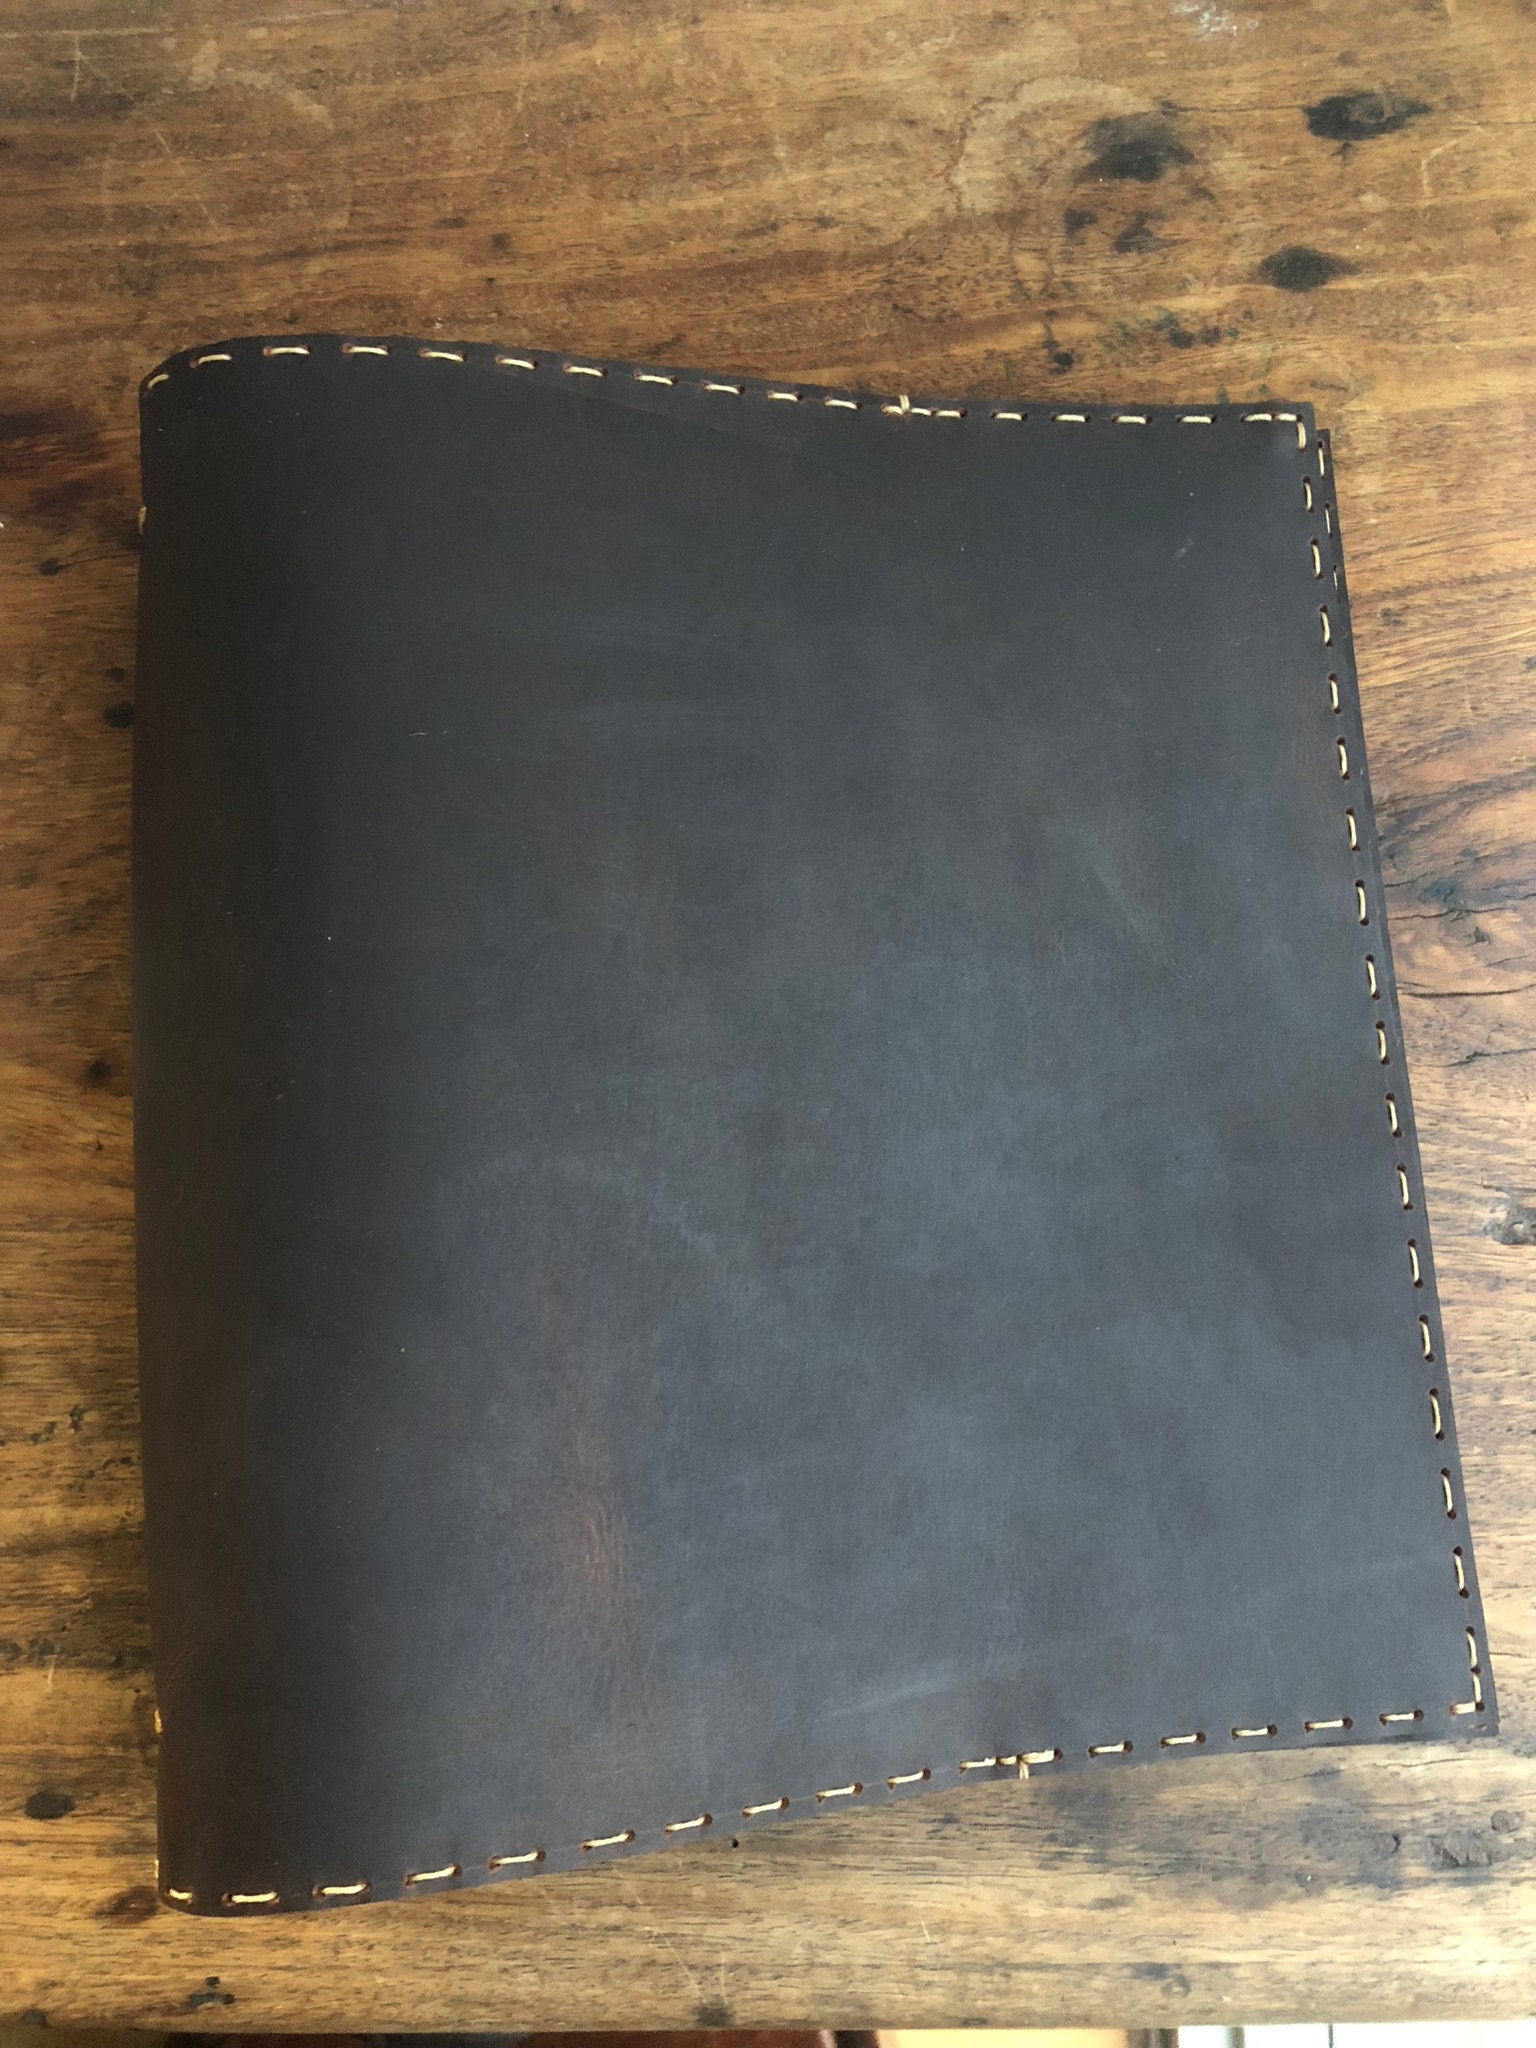 Leather refillable sketchbook, Large brown leather 8.5 x 11 custom